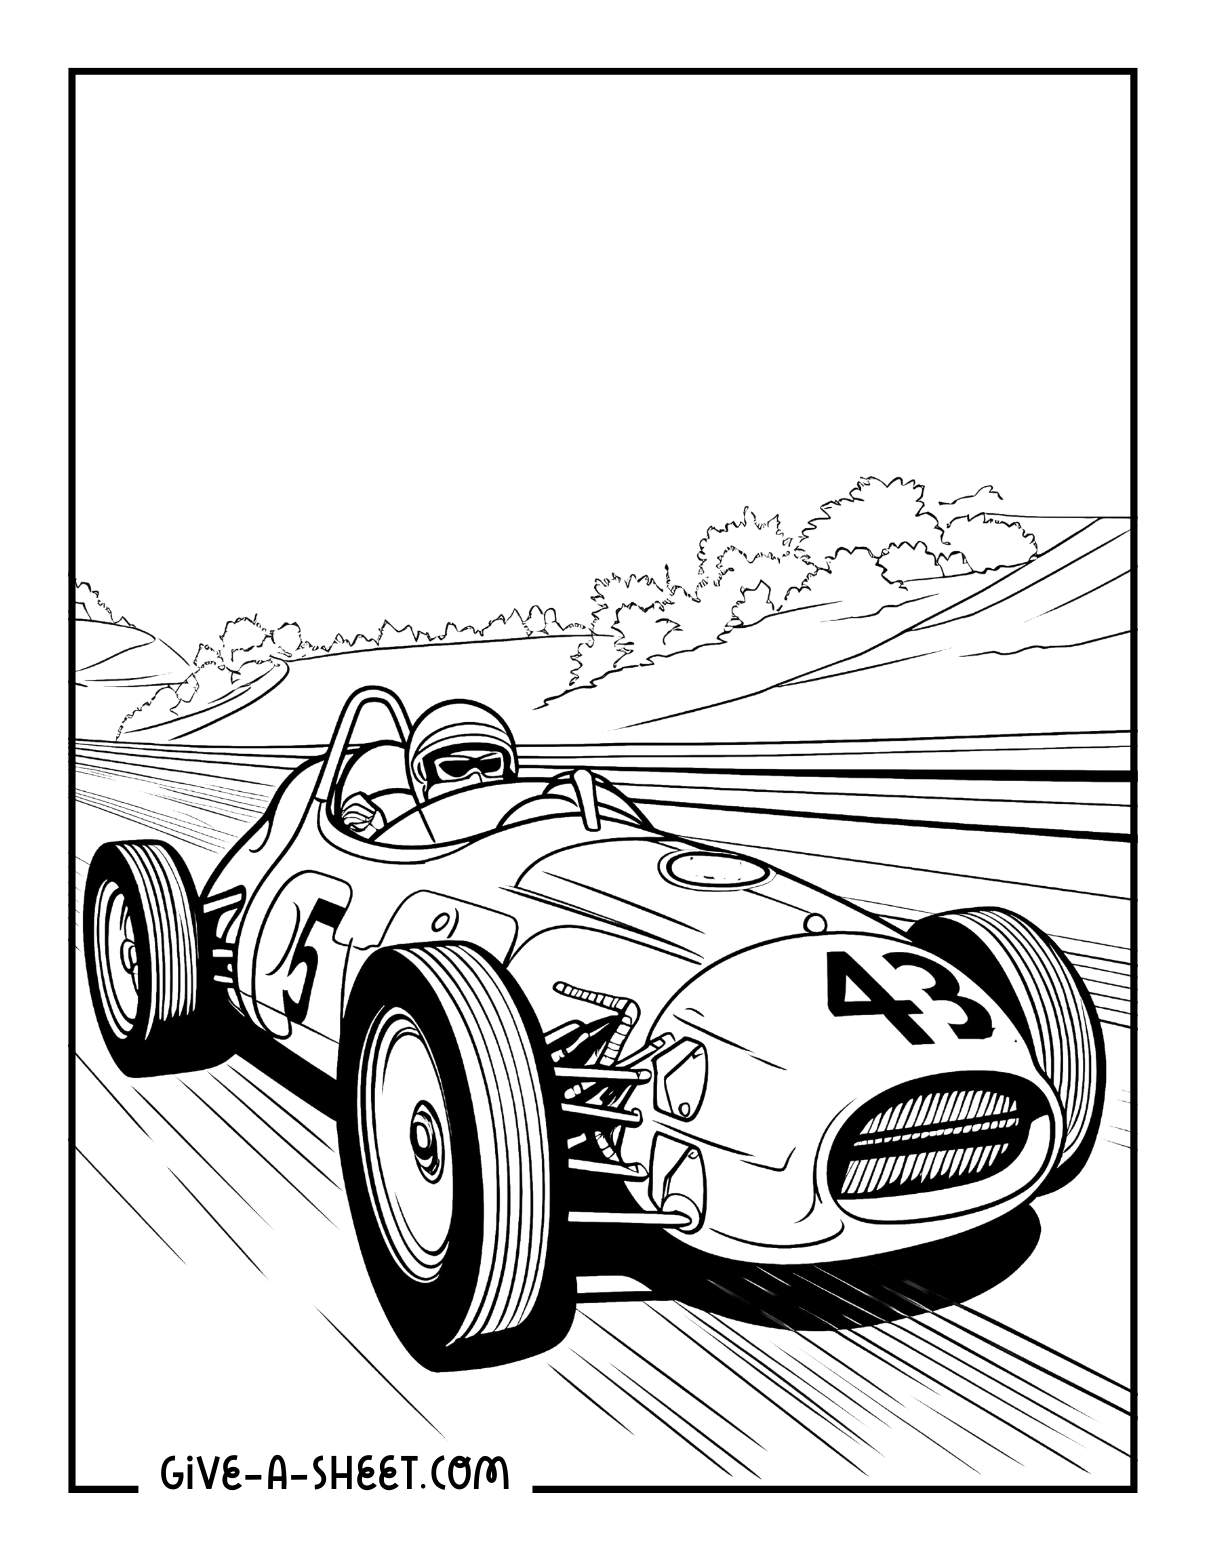 Nascar race car coloring sheet for adults.